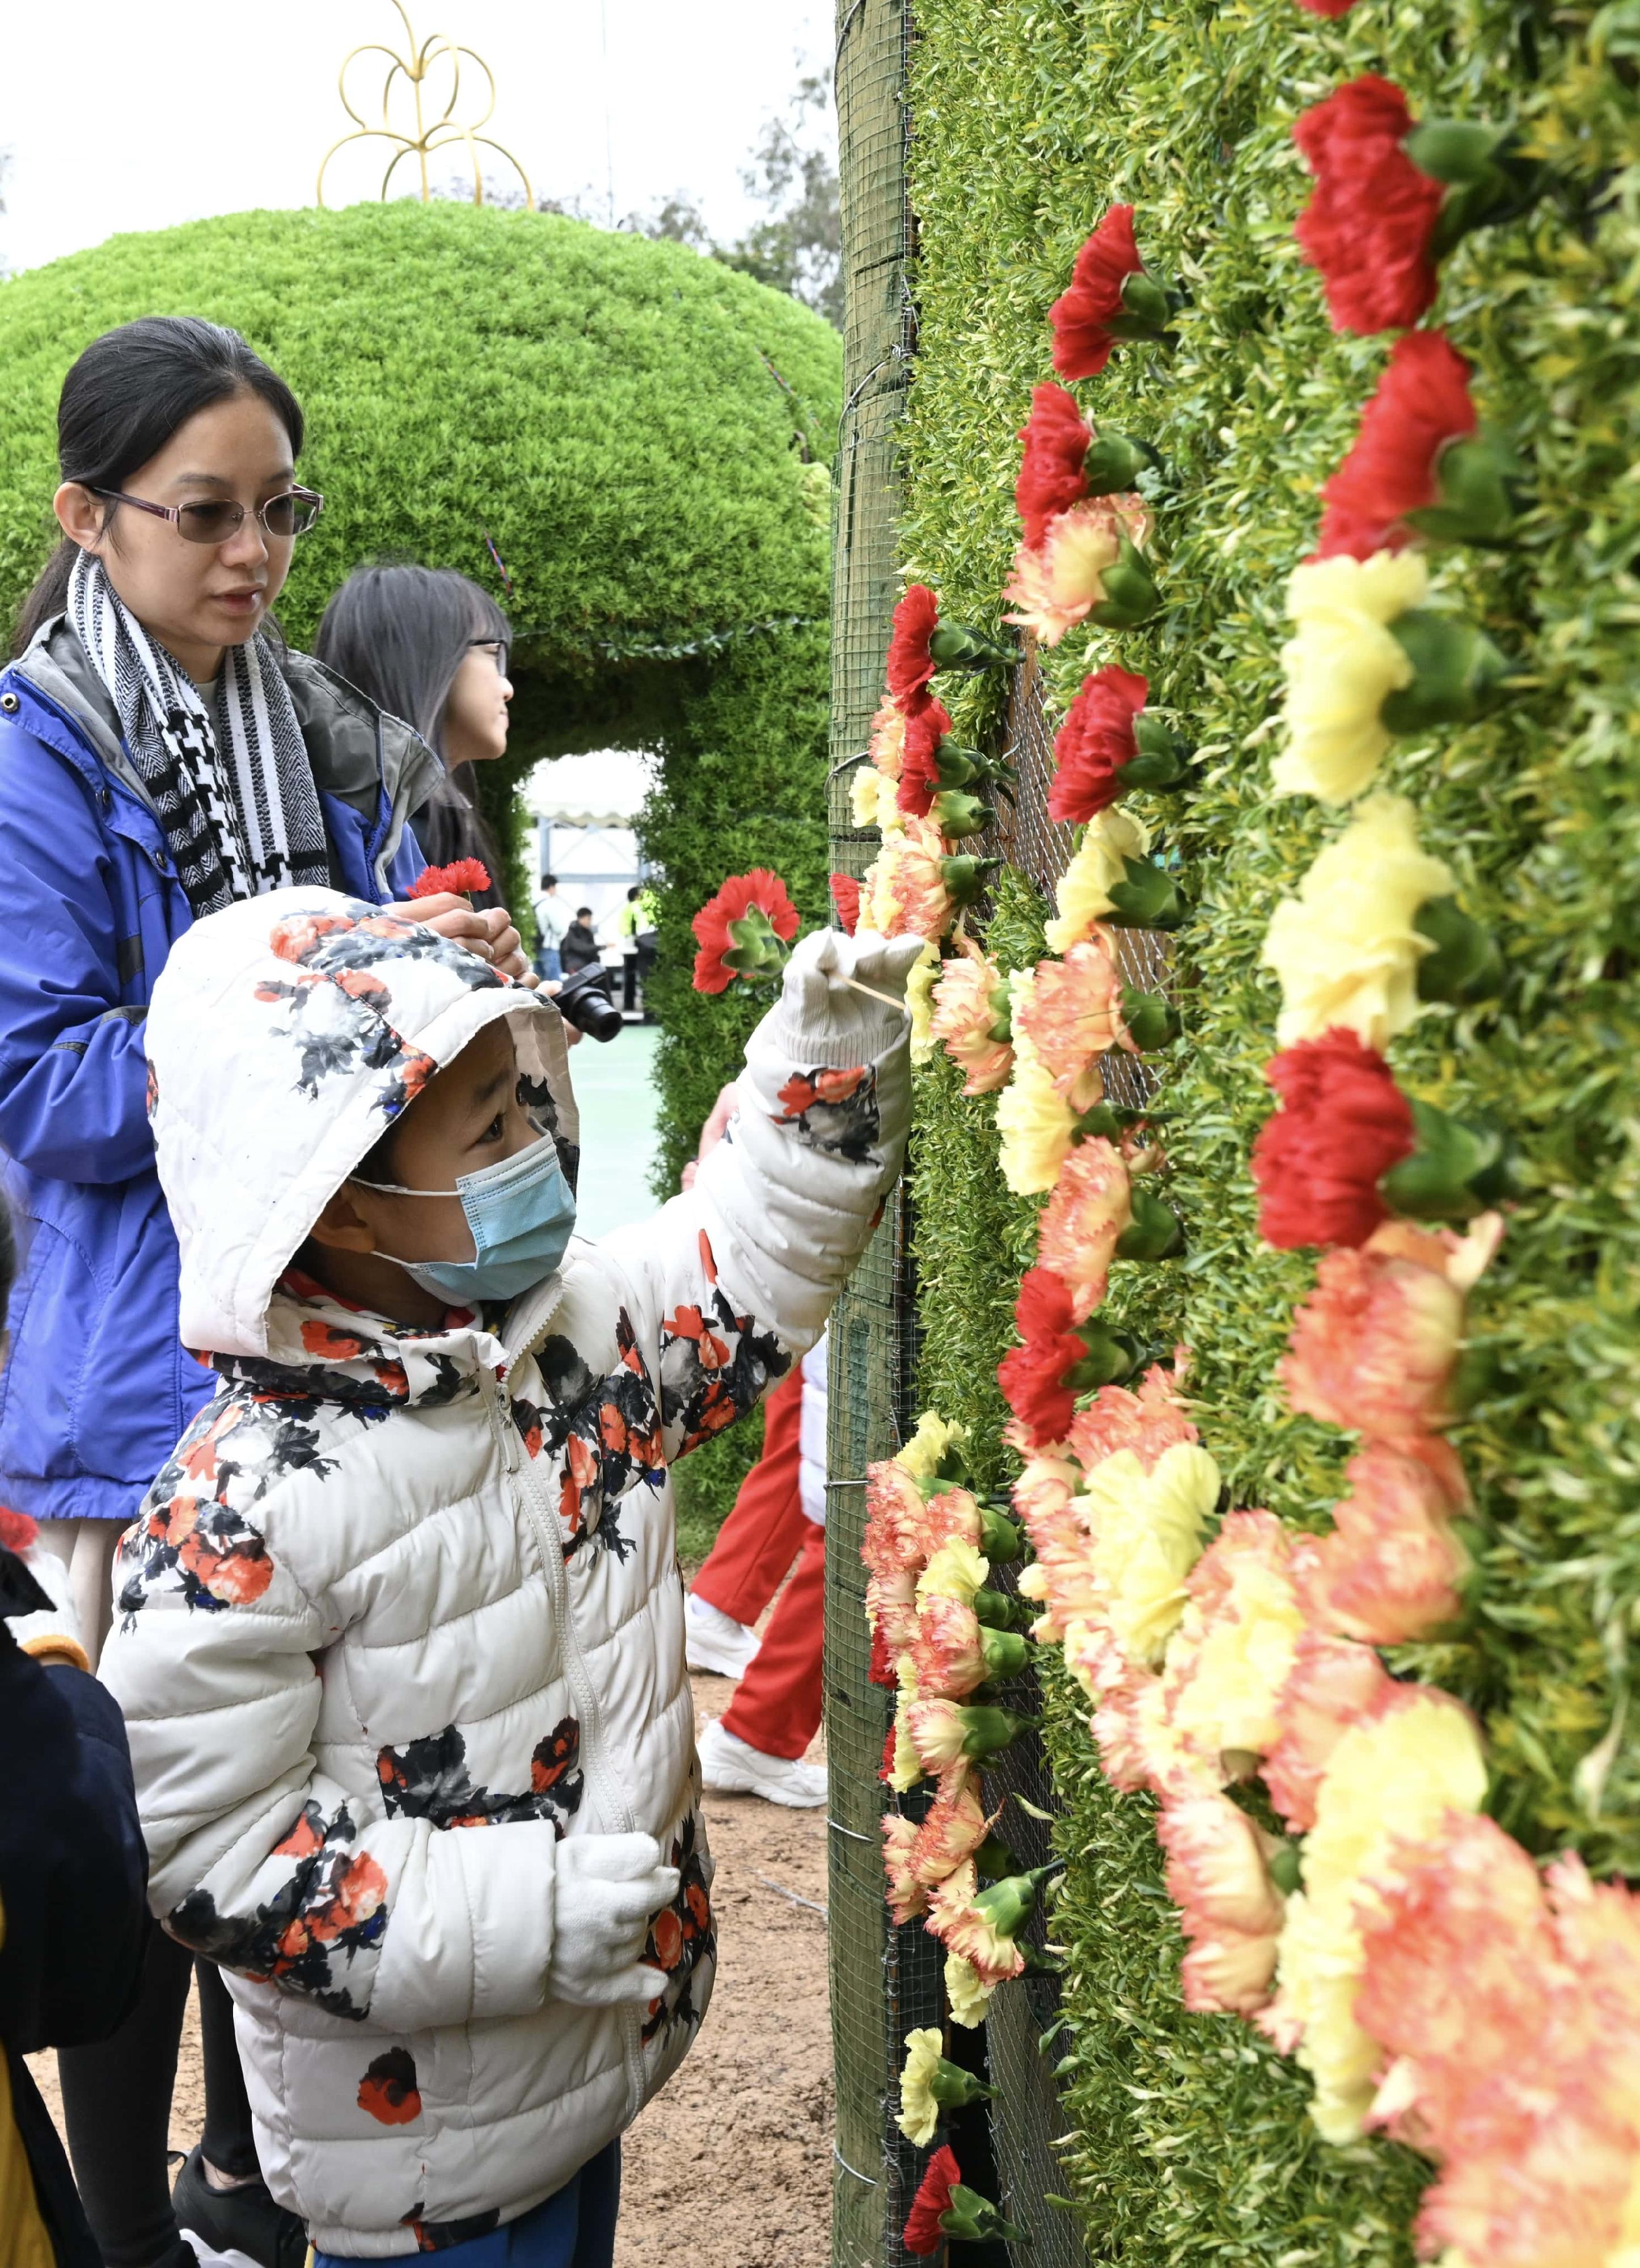 More than 1 100 students from 38 schools helped put on a spectacular horticultural display, "The Candy House", at Victoria Park today (March 2). Photo shows a student in action.